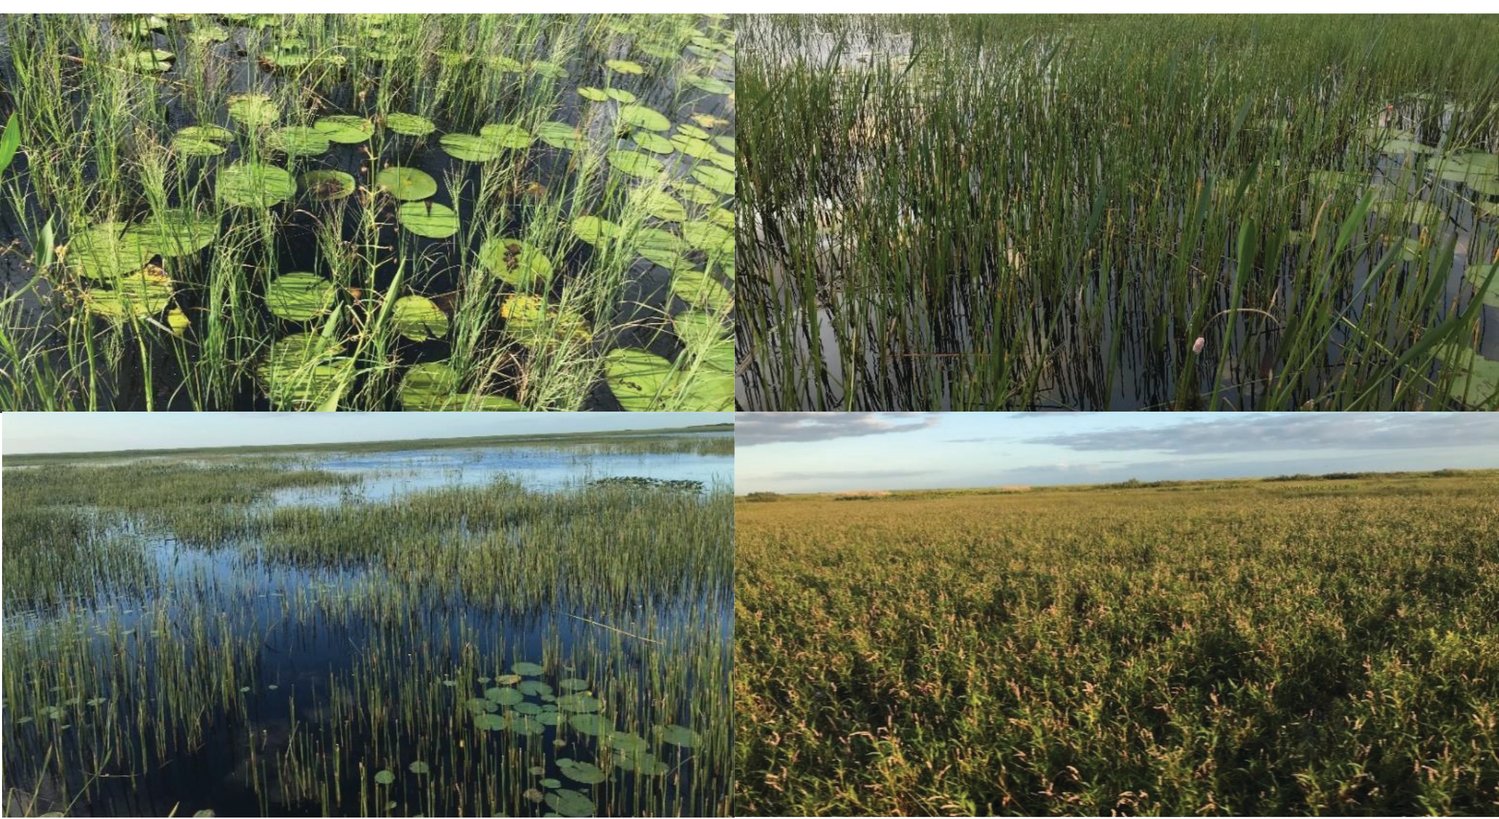 Post-management monitoring of previous cattail removal efforts shows the return of a diverse aquatic plant community.